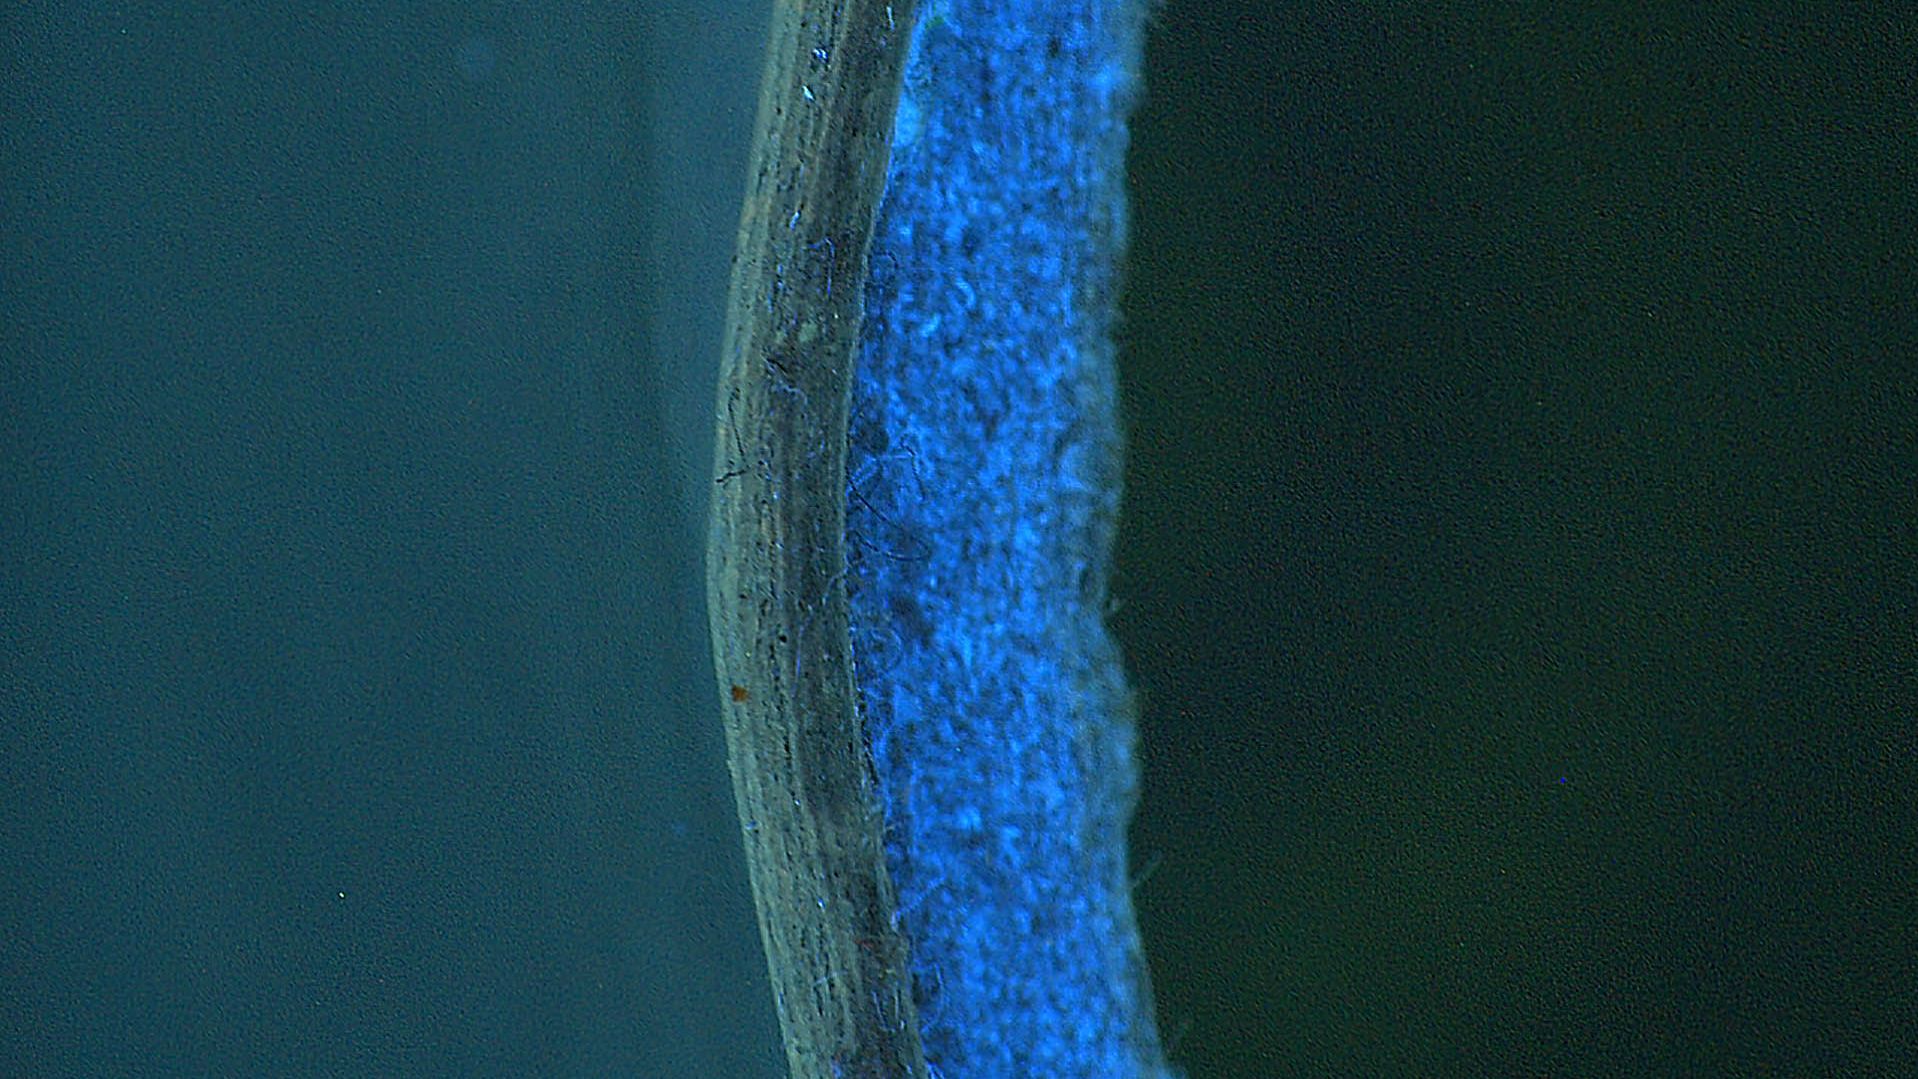 Microscope image of a labelling roll